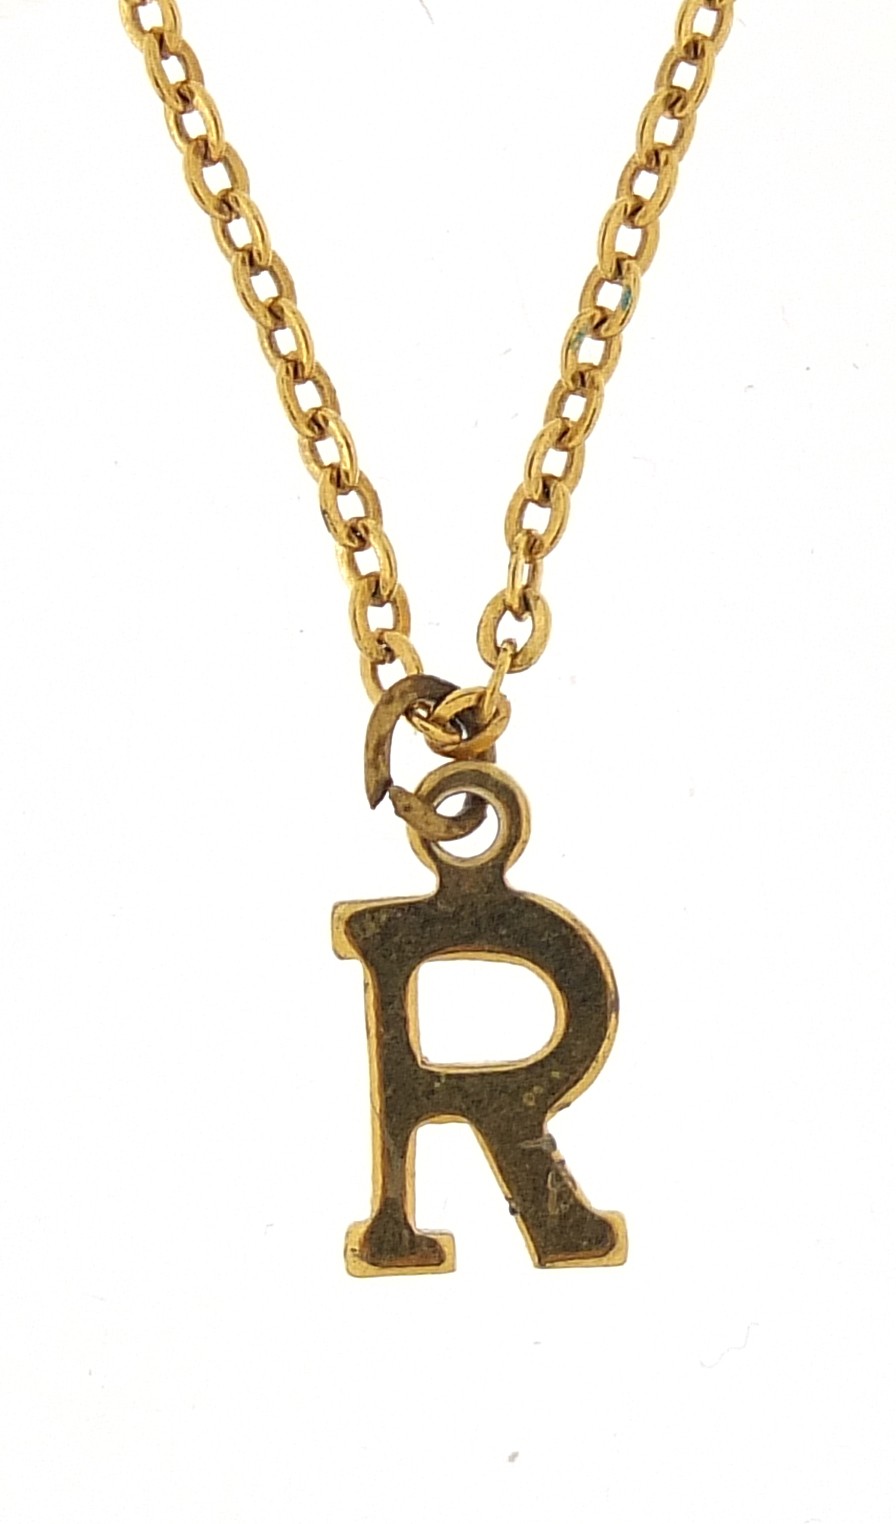 Gold coloured metal initial R pendant on a gold coloured metal necklace, 38cm in length, 1.7g - this